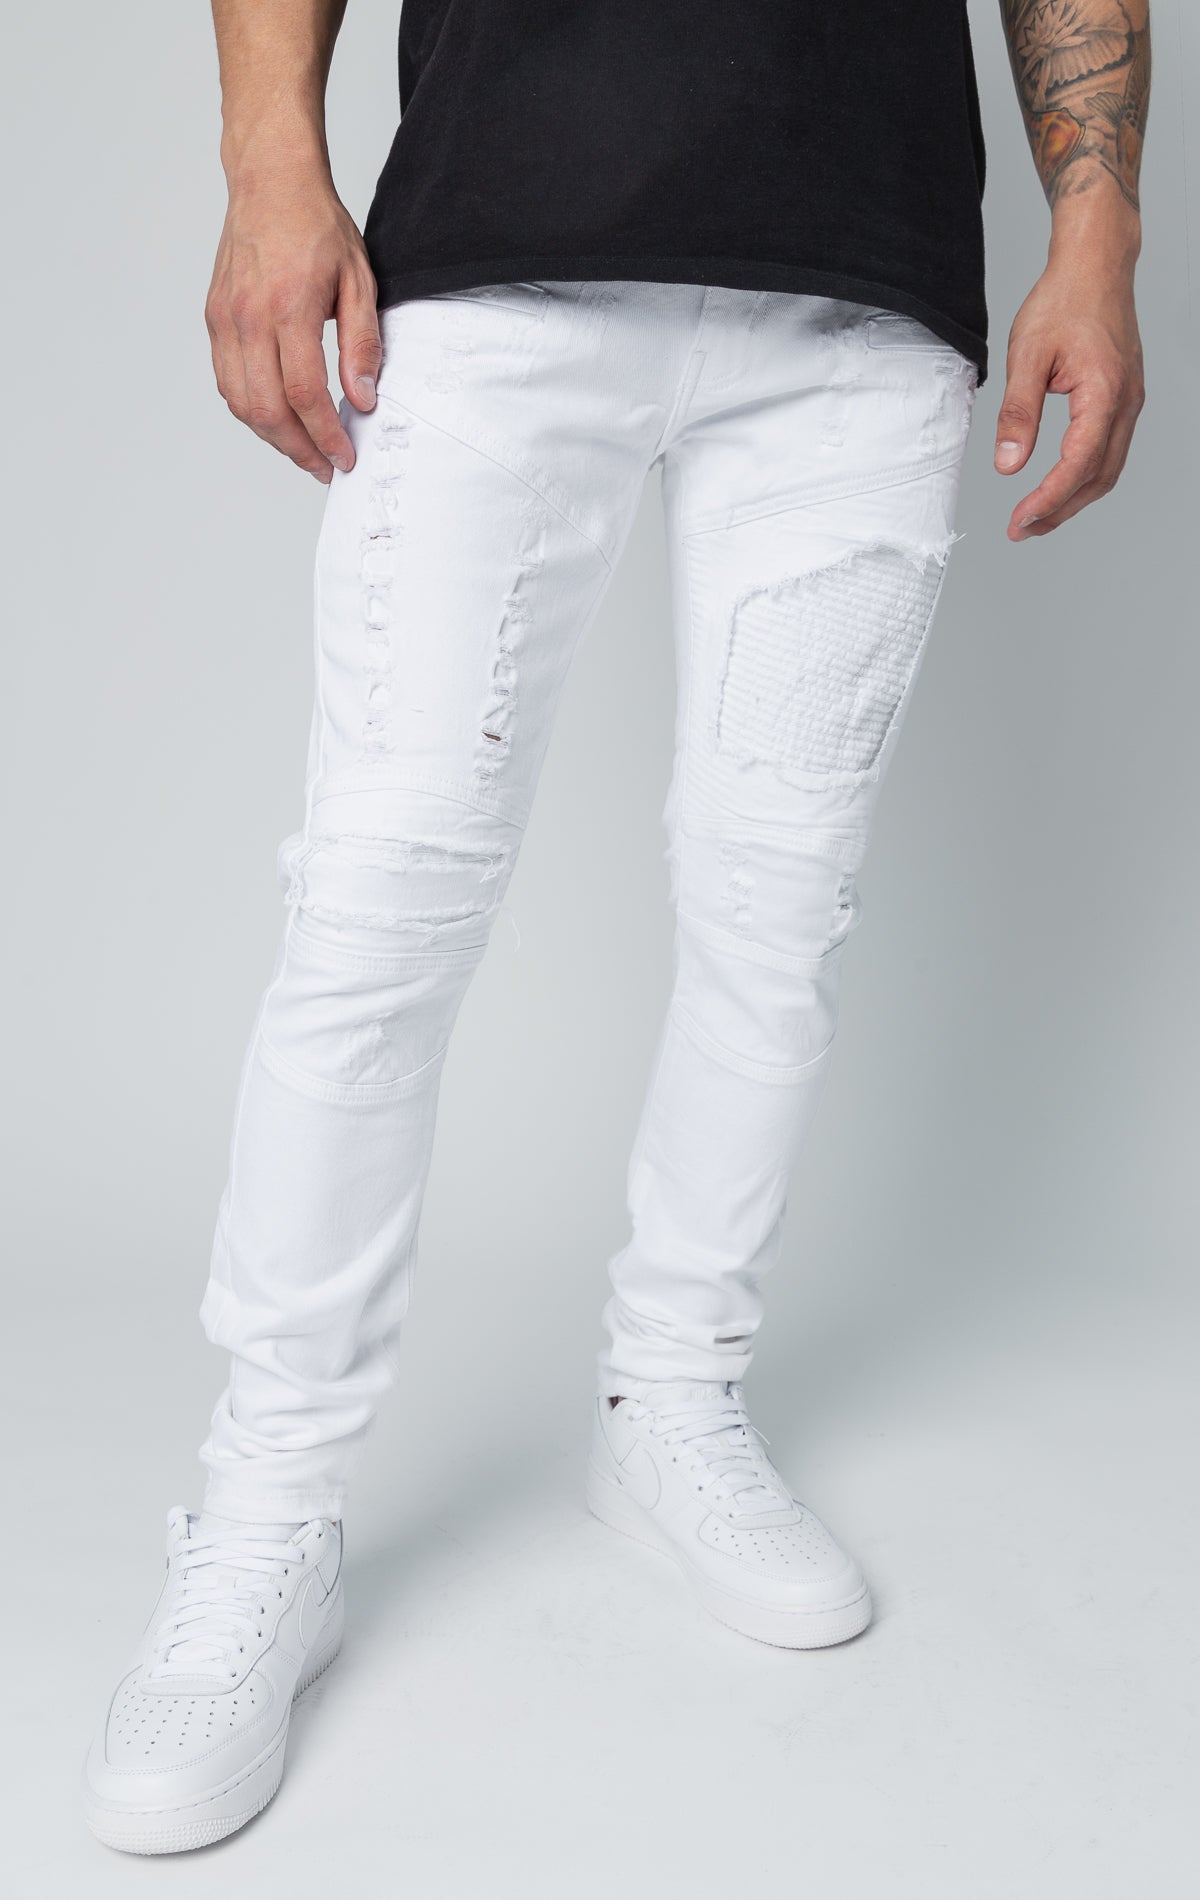 Denim ripped pants in white